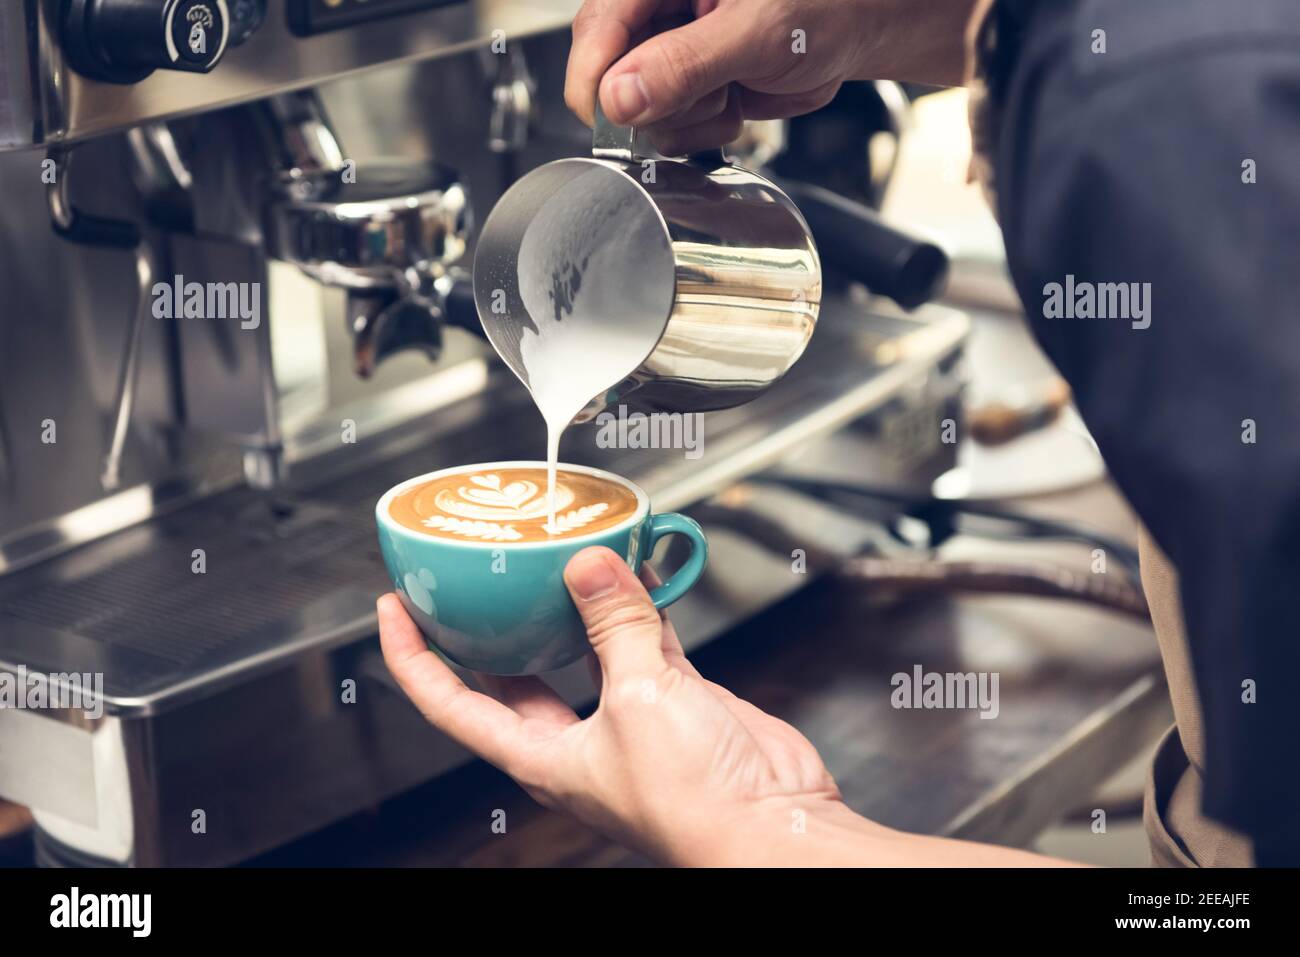 Professional barista pouring steamed milk into coffee cup making beautiful latte art Rosetta pattern Stock Photo